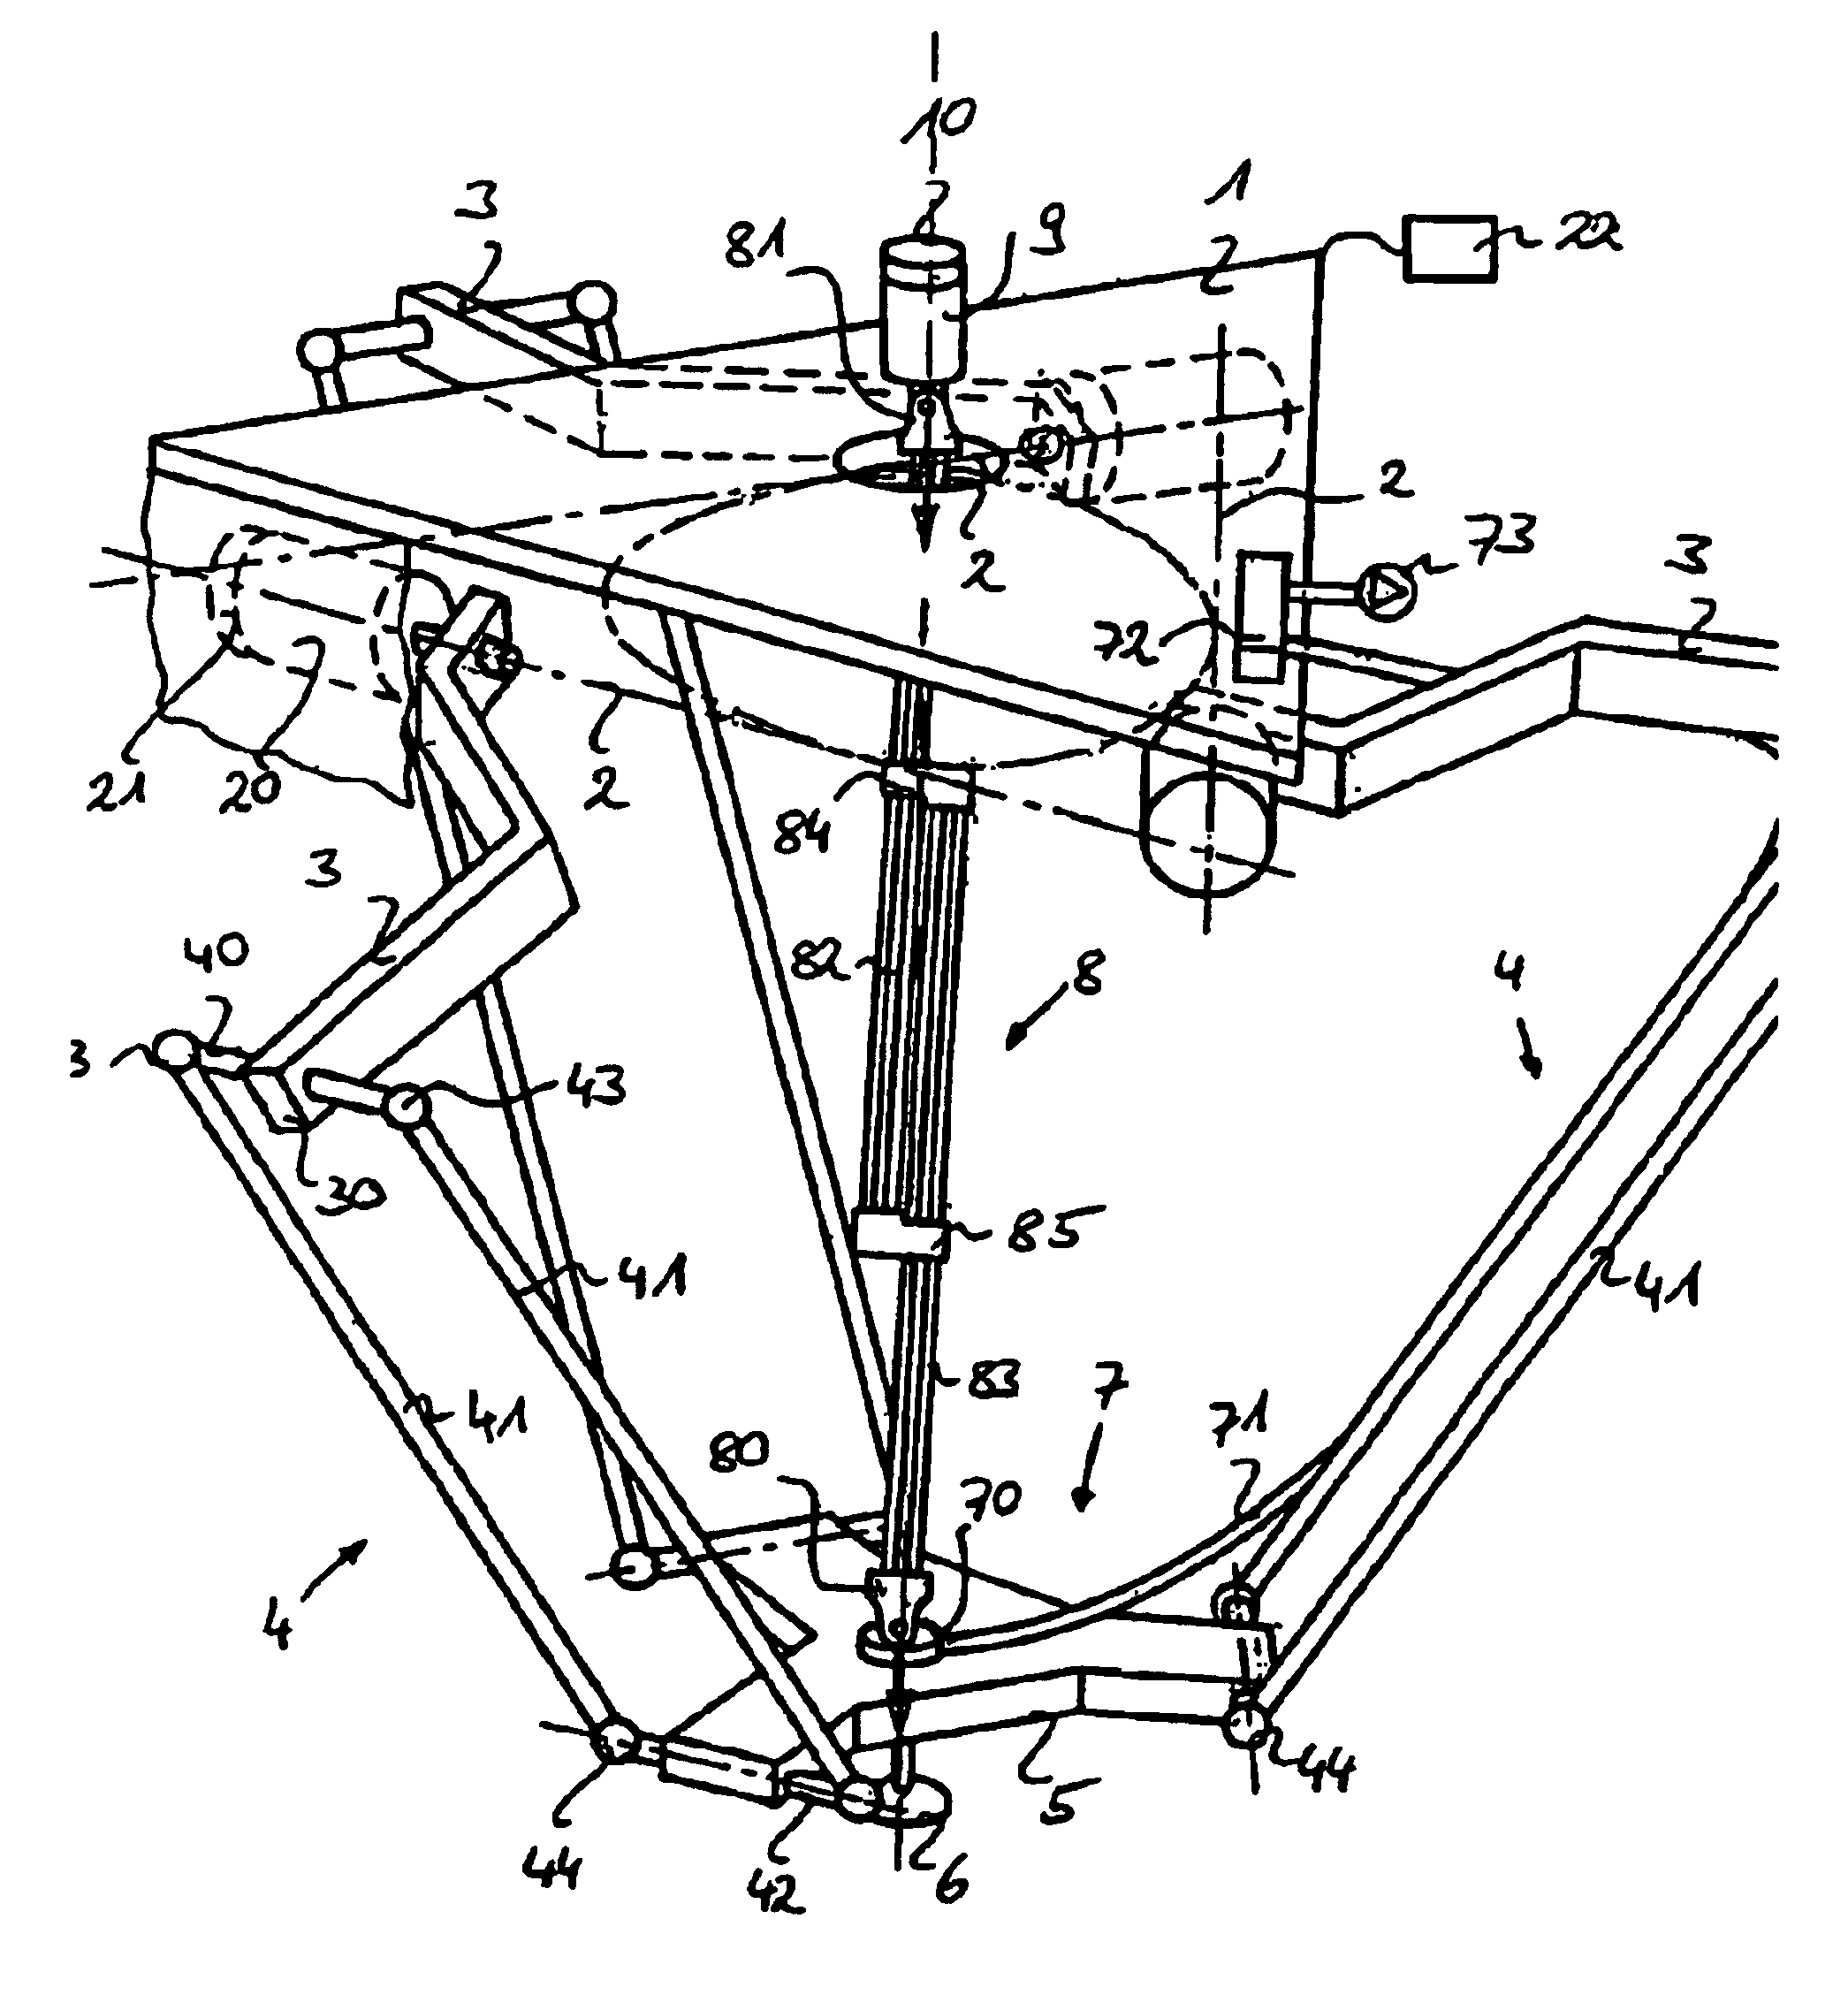 Device for transmitting torque